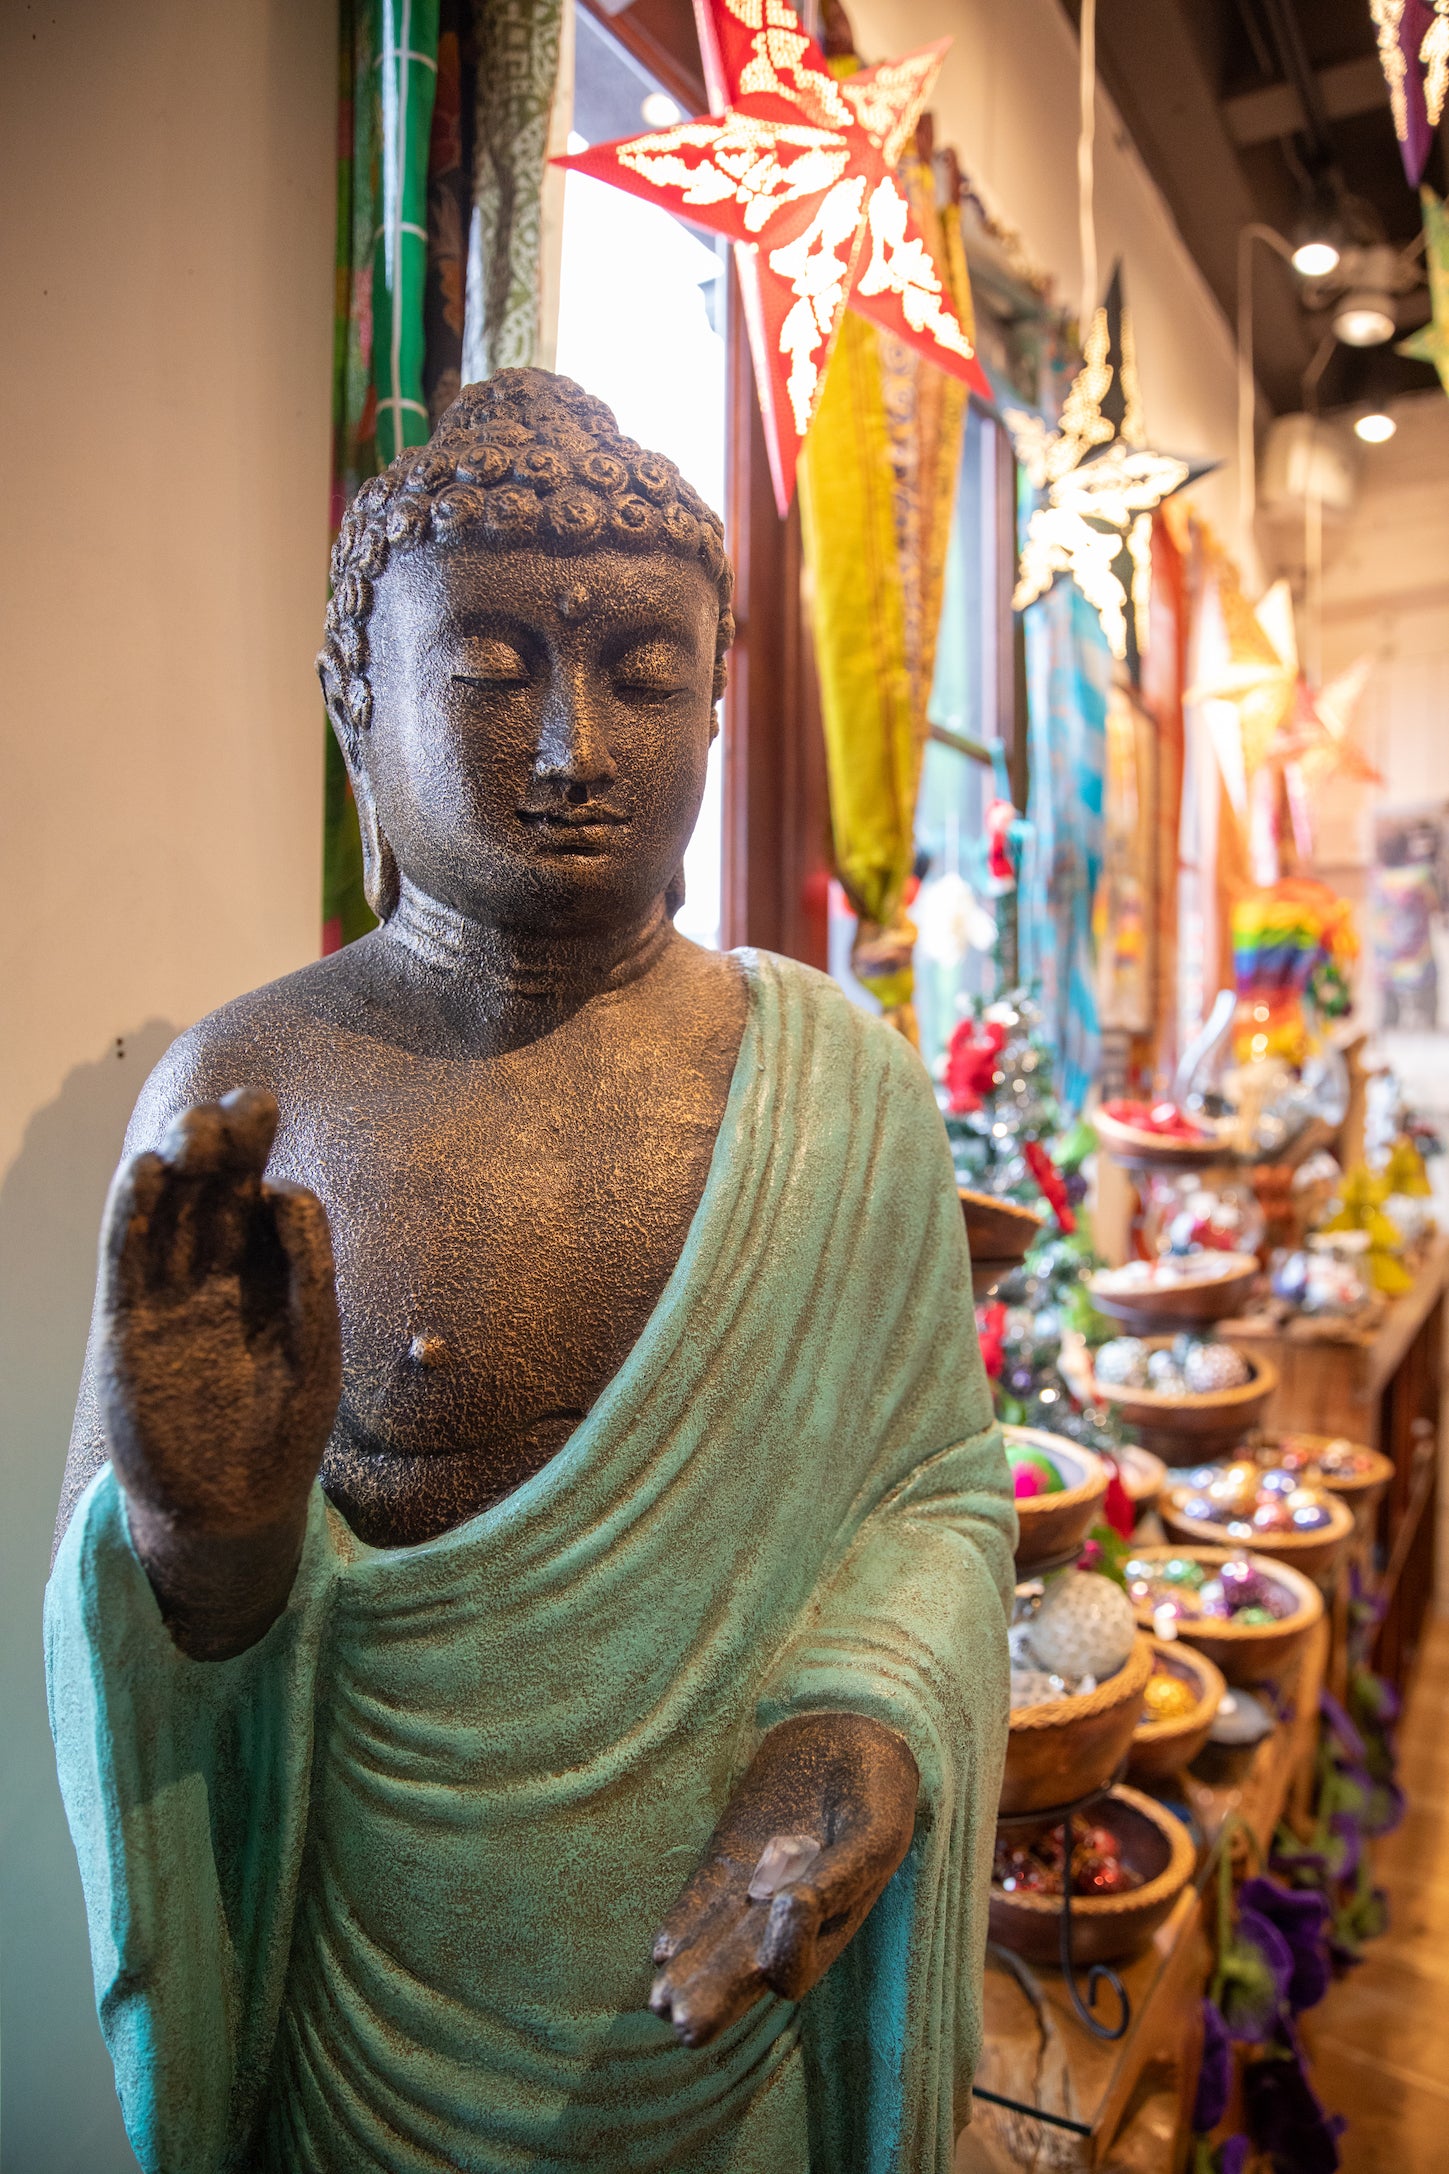 Large Buddha statue greeting Mexicali Blues customers in our Portland, Maine location with all kinds colorful products and star lanterns in the background